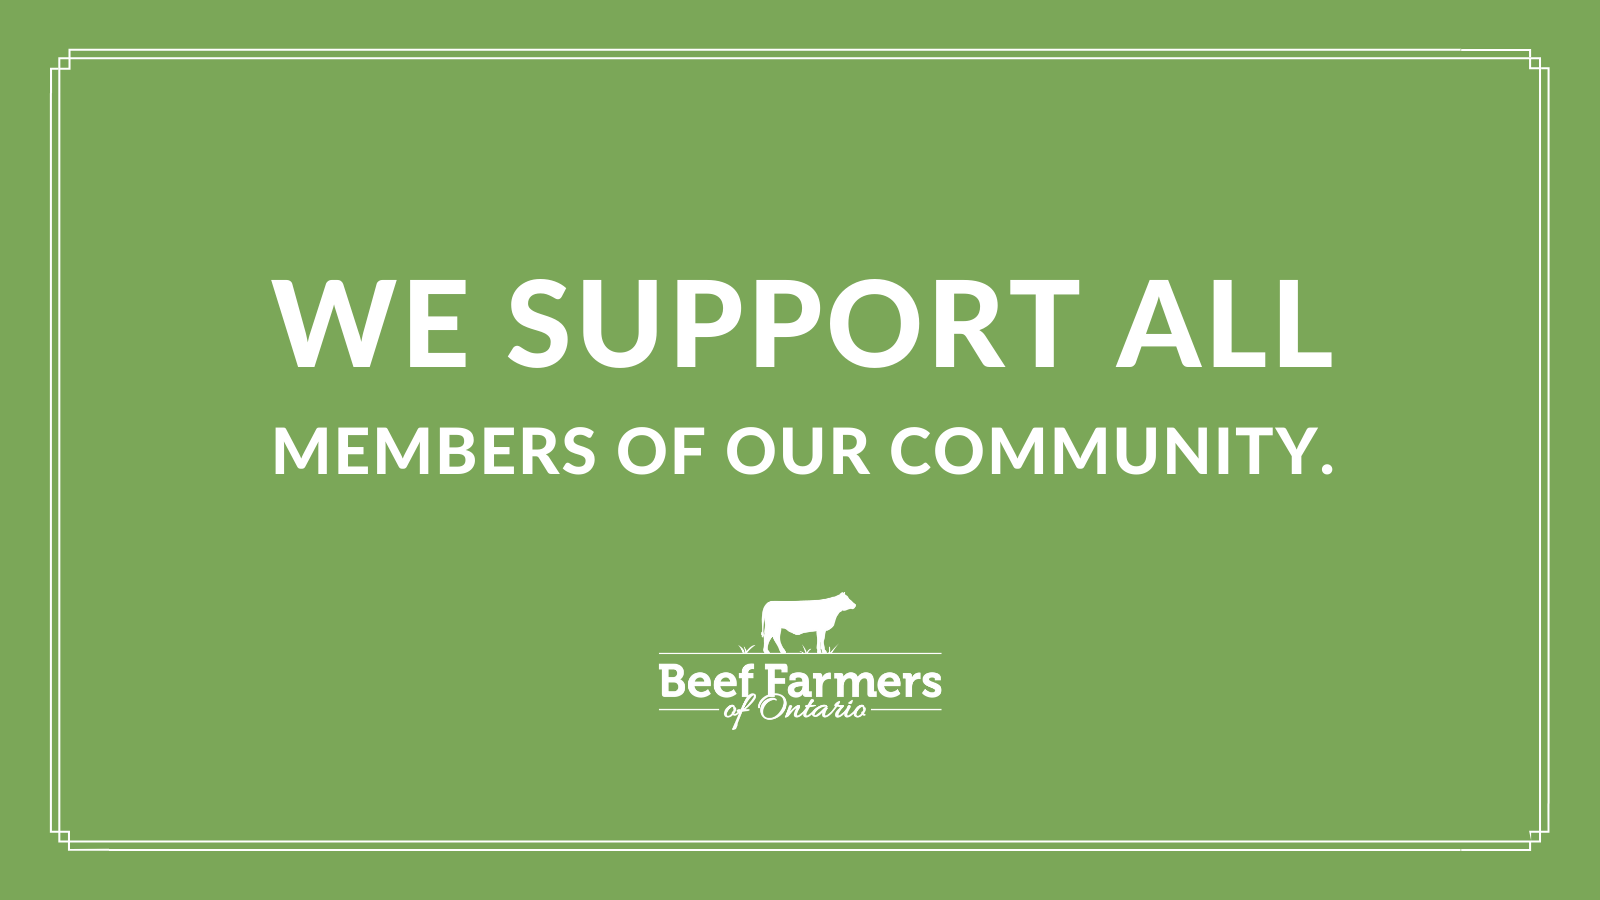 We support ALL - Beef Farmers of Ontario